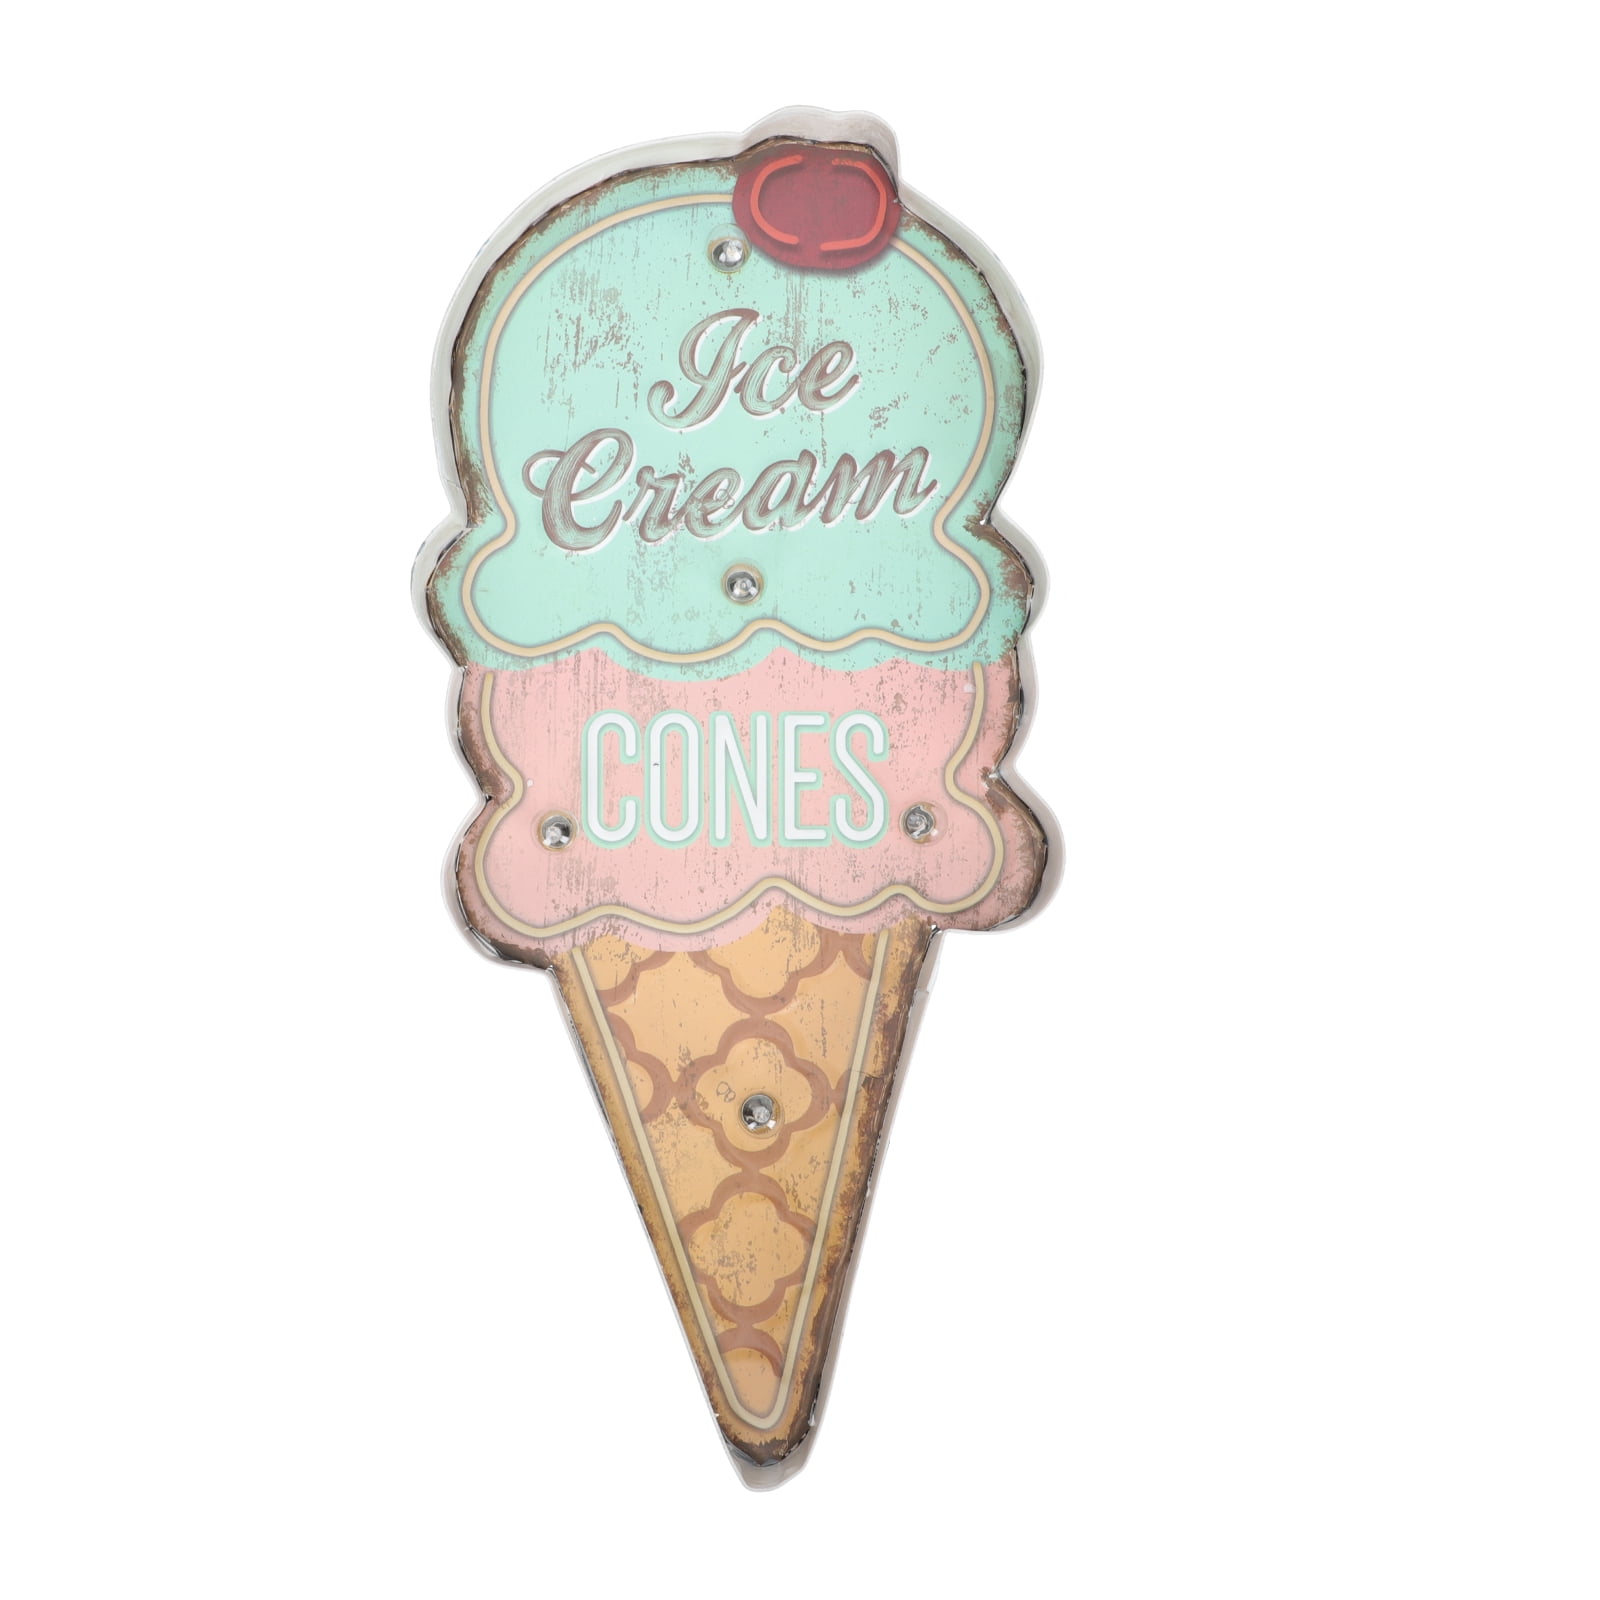 SOFT SCOOP ICE CREAM SOLD HERE PVC Printed BANNER OUTDOOR SIGN PVC with Eyelets 